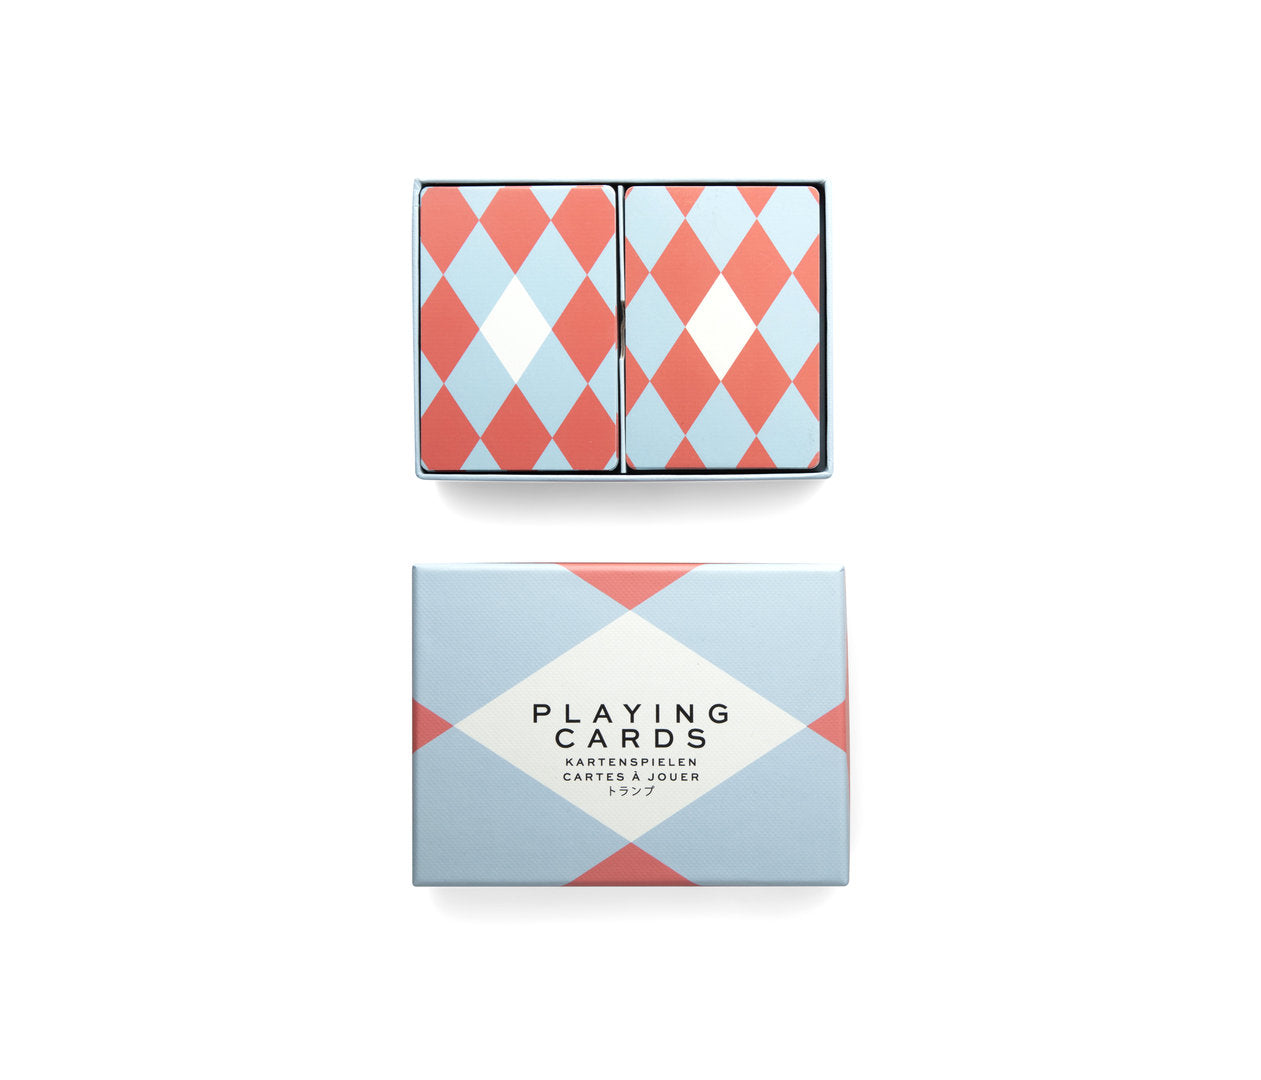 Printworks NEW PLAY - Playing Cards